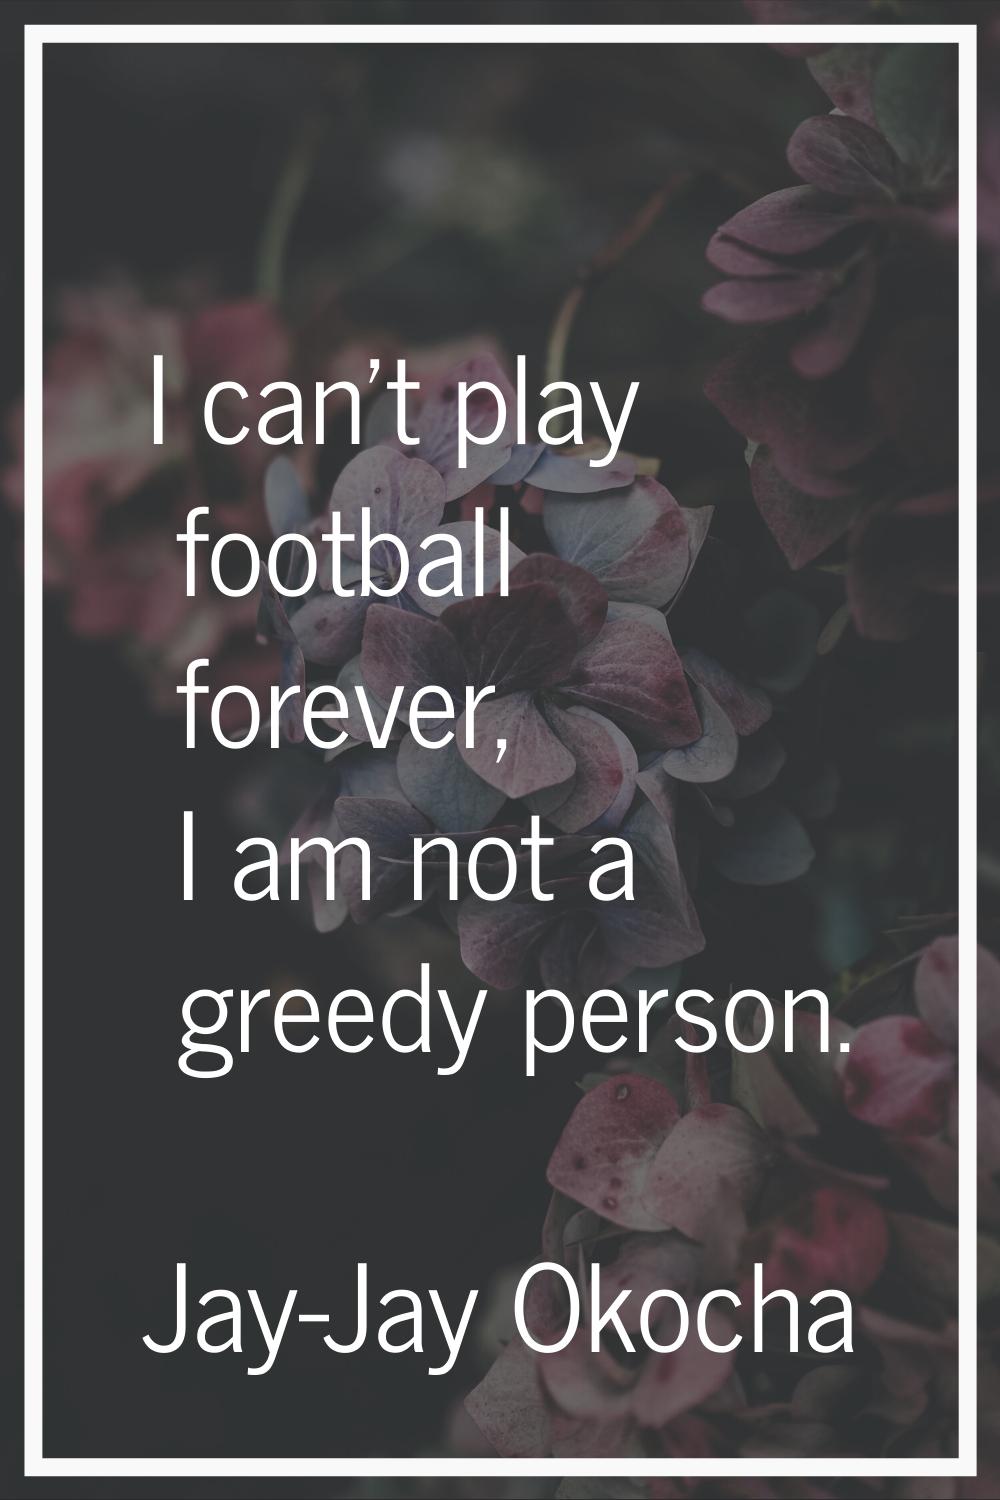 I can't play football forever, I am not a greedy person.